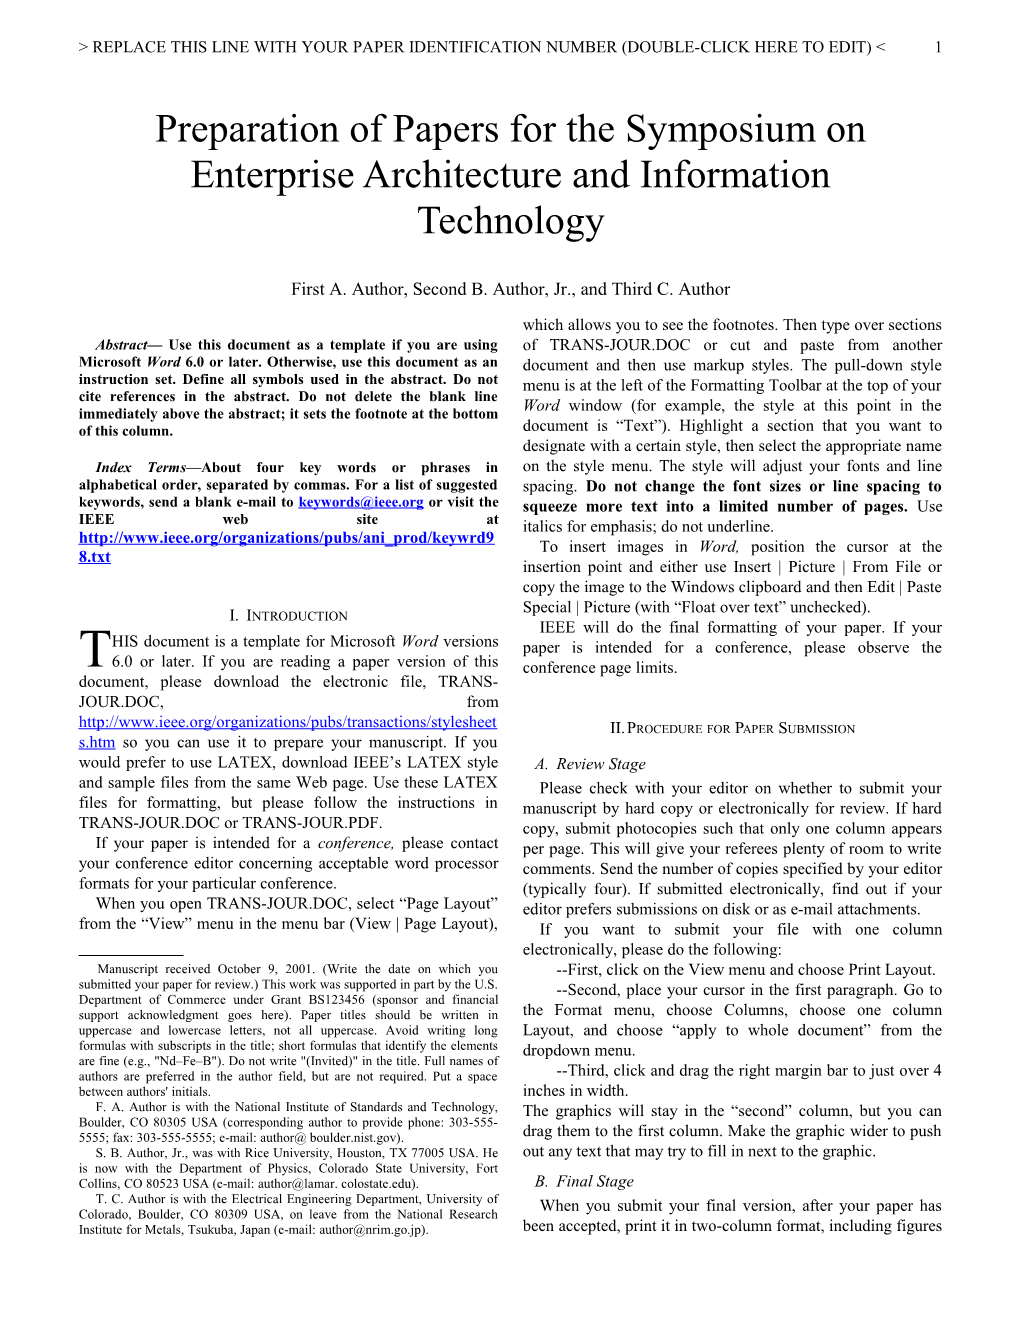 Preparation of Papers for the Symposium on Enterprise Architecture and Information Technology